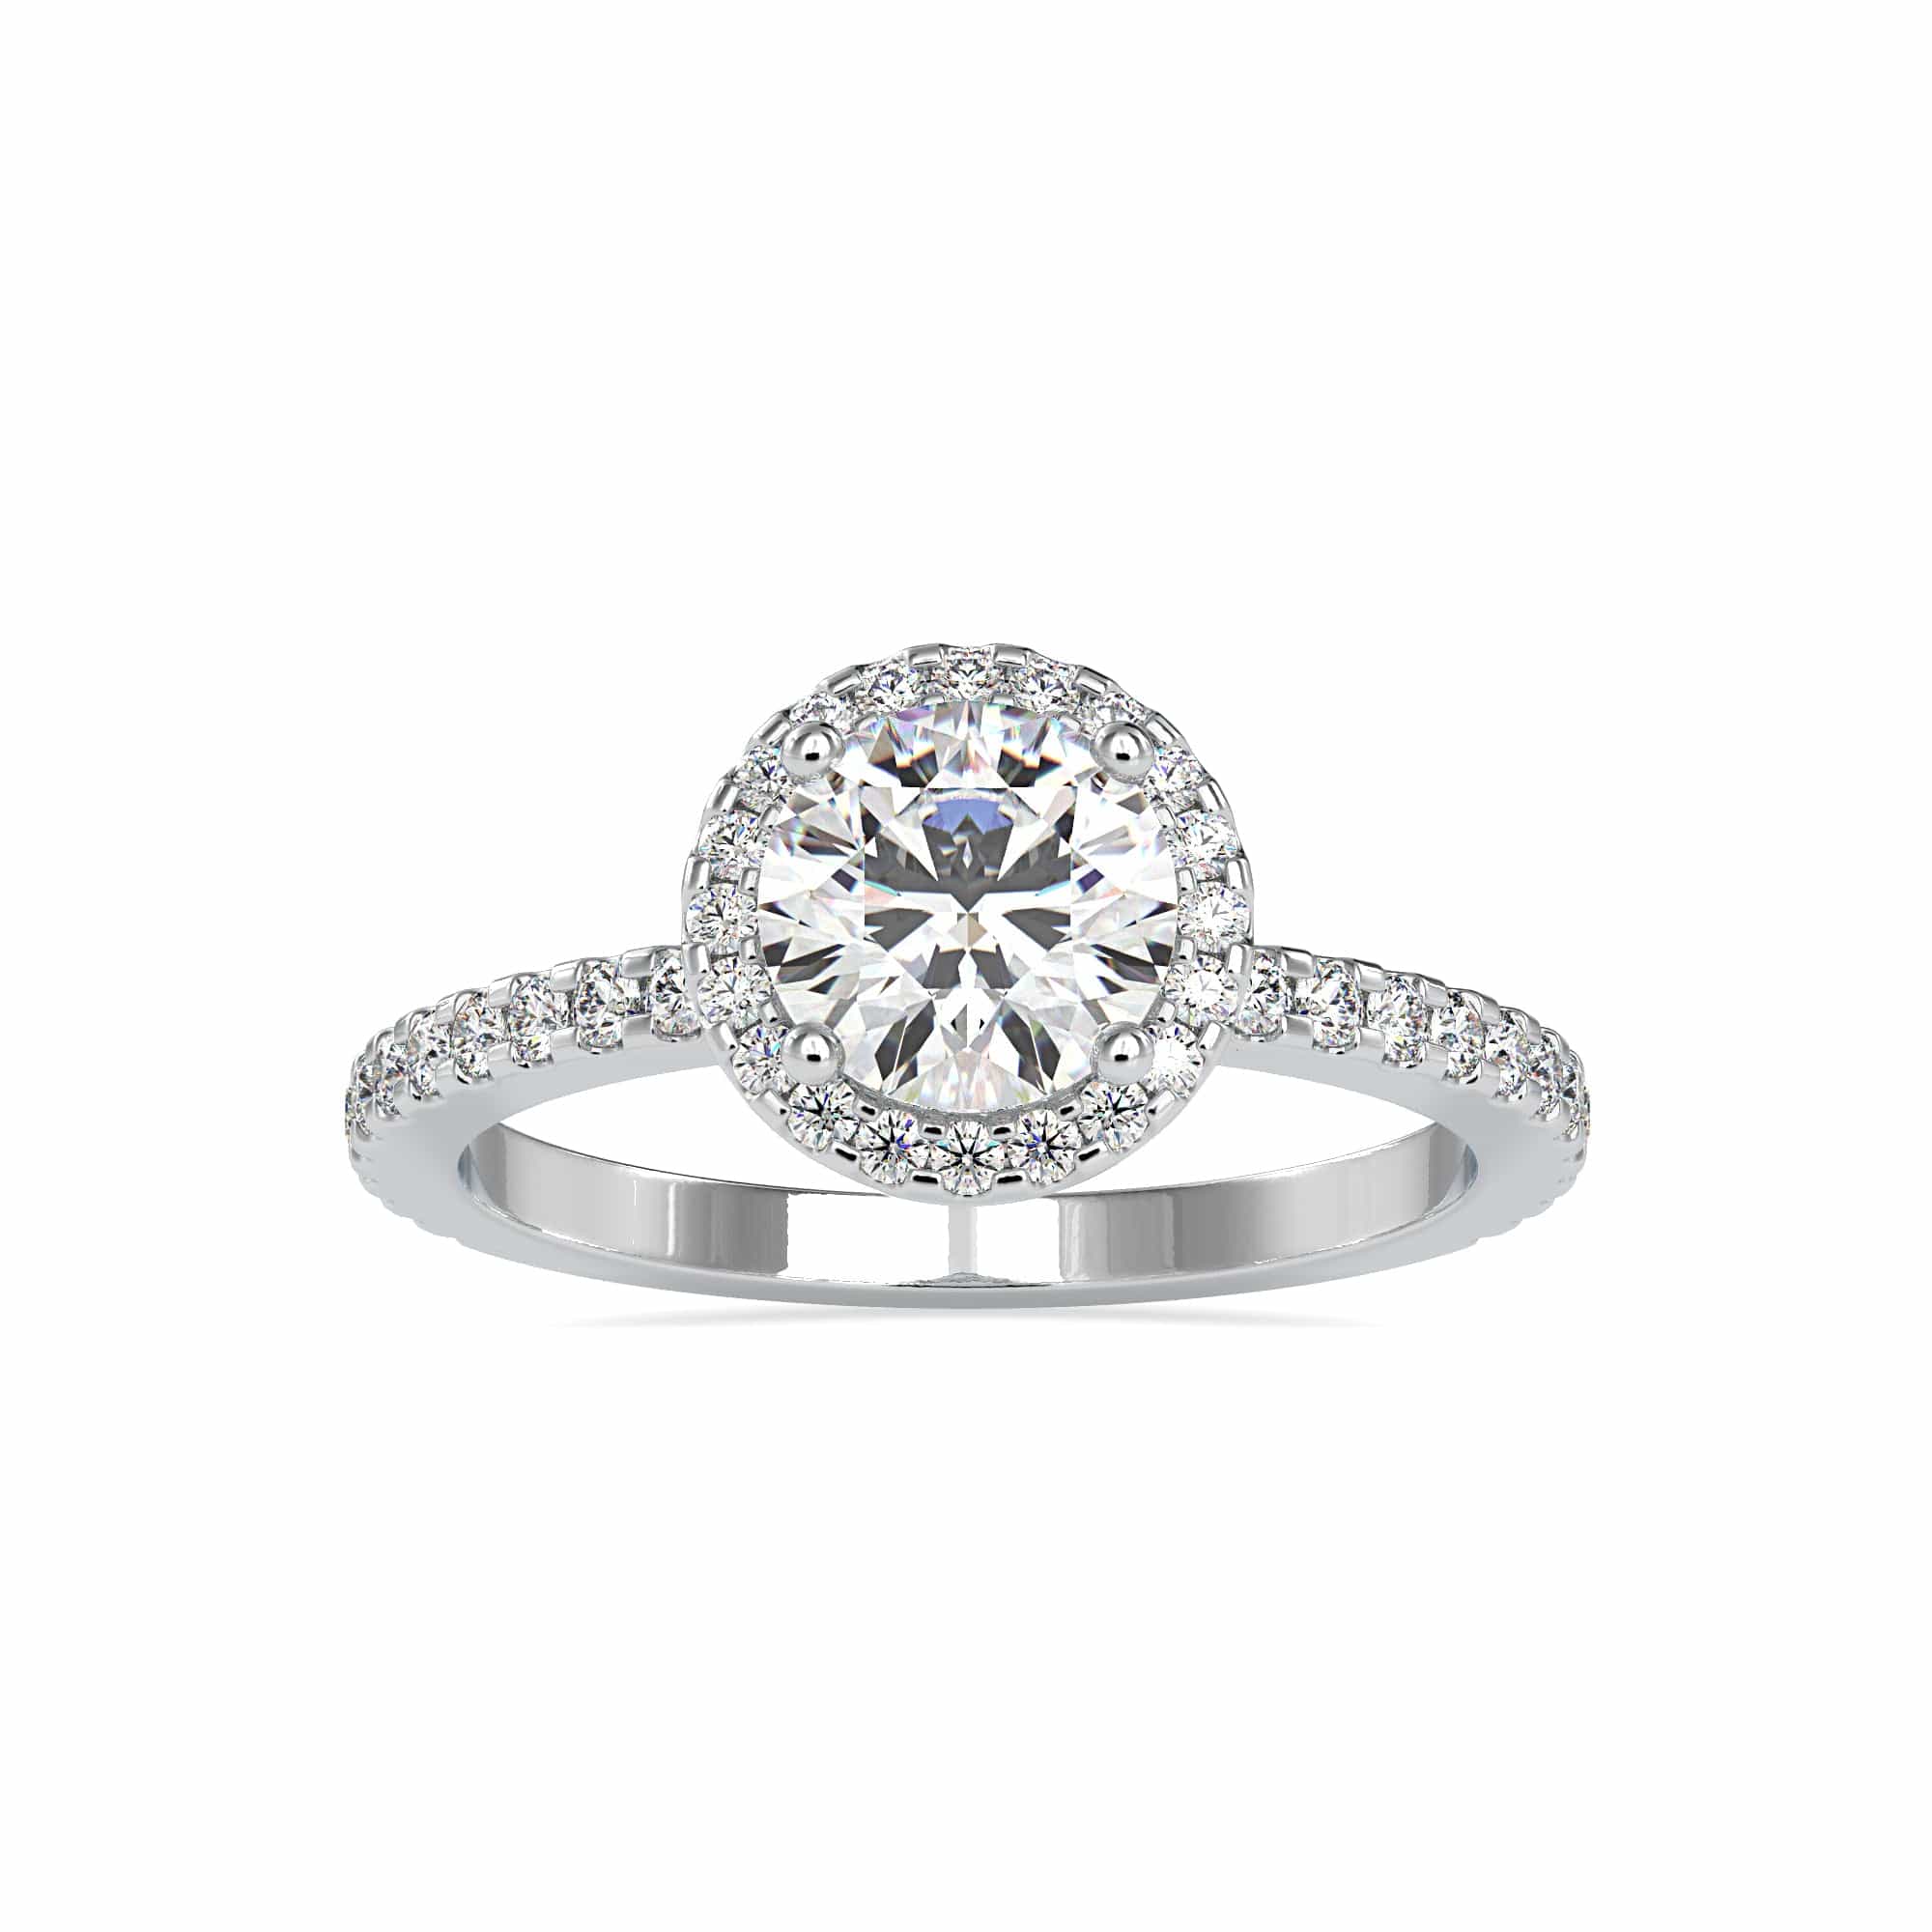 Halo Engagement Rings: 39 Rings Ideas To Get More Bling